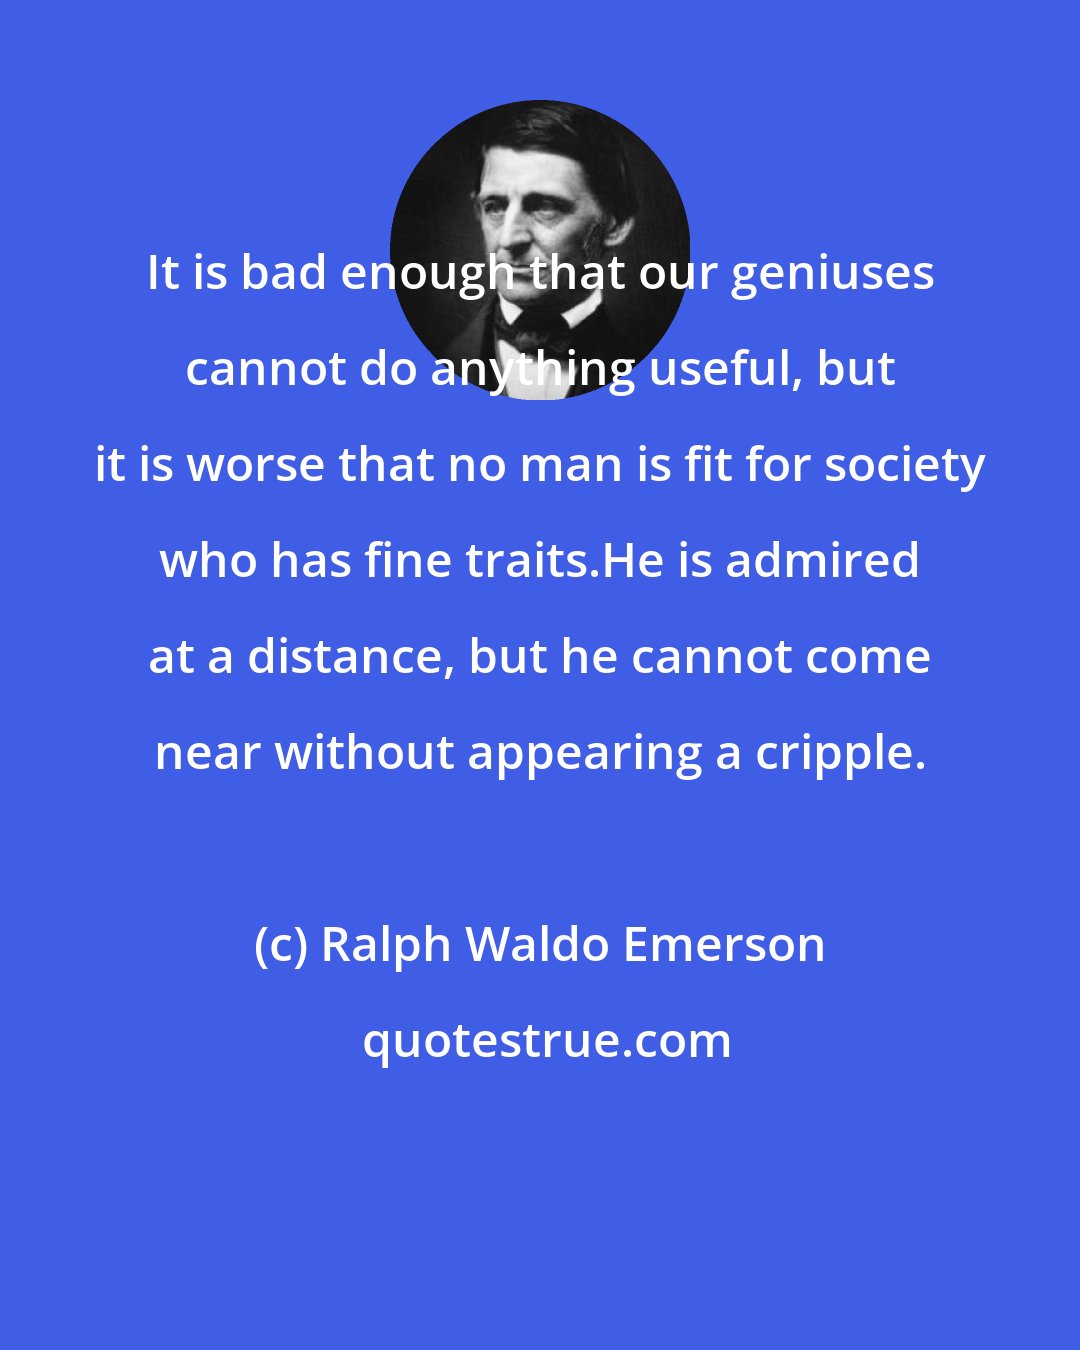 Ralph Waldo Emerson: It is bad enough that our geniuses cannot do anything useful, but it is worse that no man is fit for society who has fine traits.He is admired at a distance, but he cannot come near without appearing a cripple.